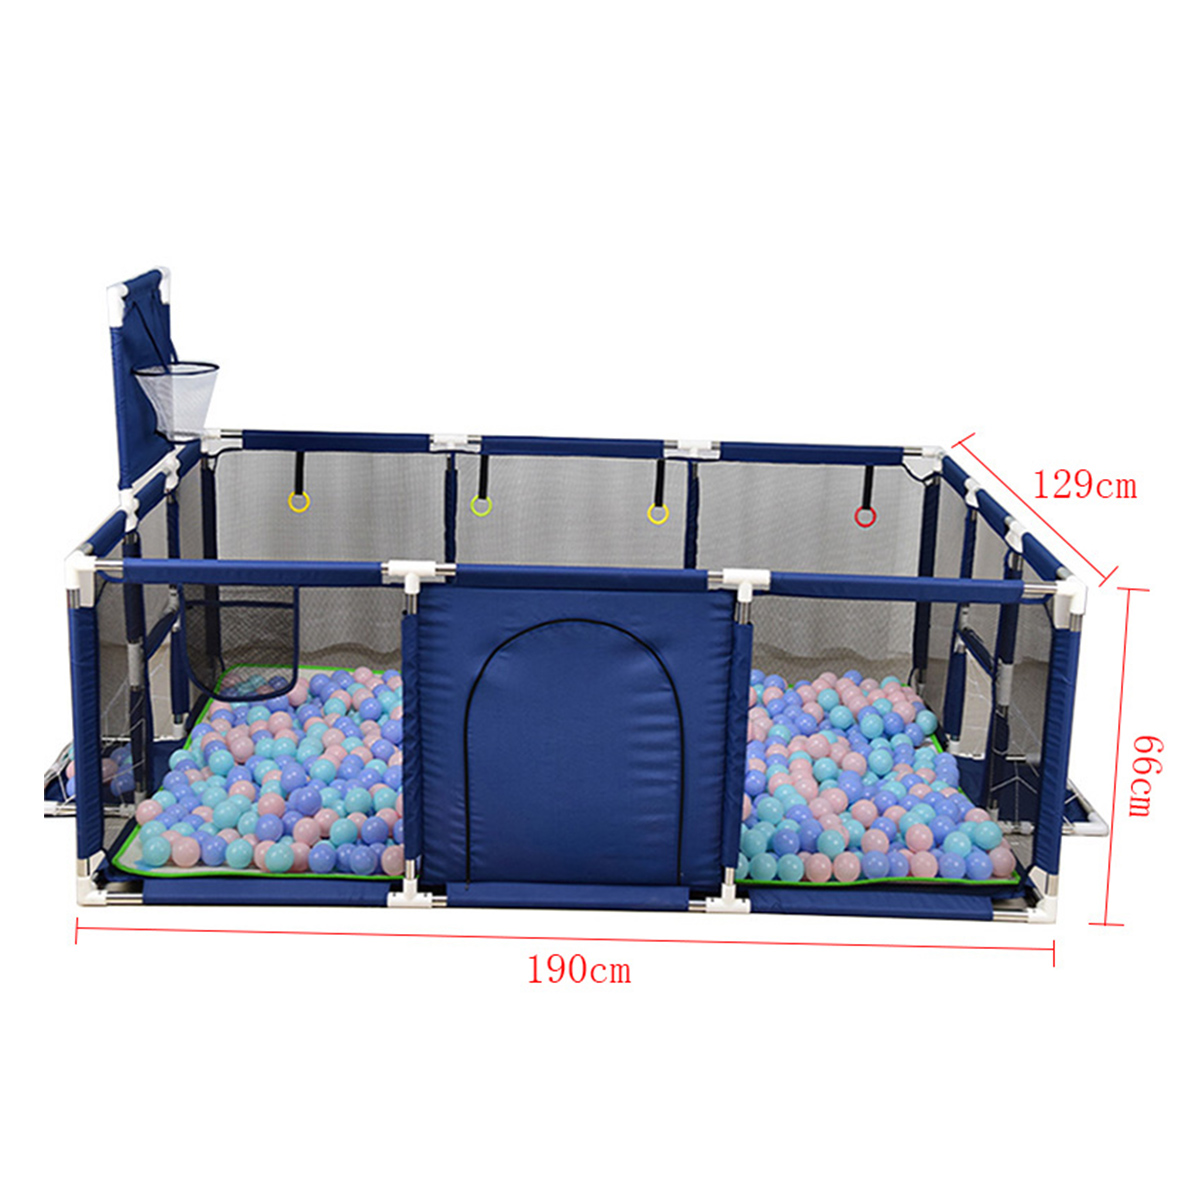 3-in-1-Baby-Playpen-Interactive-Safety-Indoor-Gate-Play-Yards-Tent-Basketball-Court-Kids-Furniture-f-1693785-8